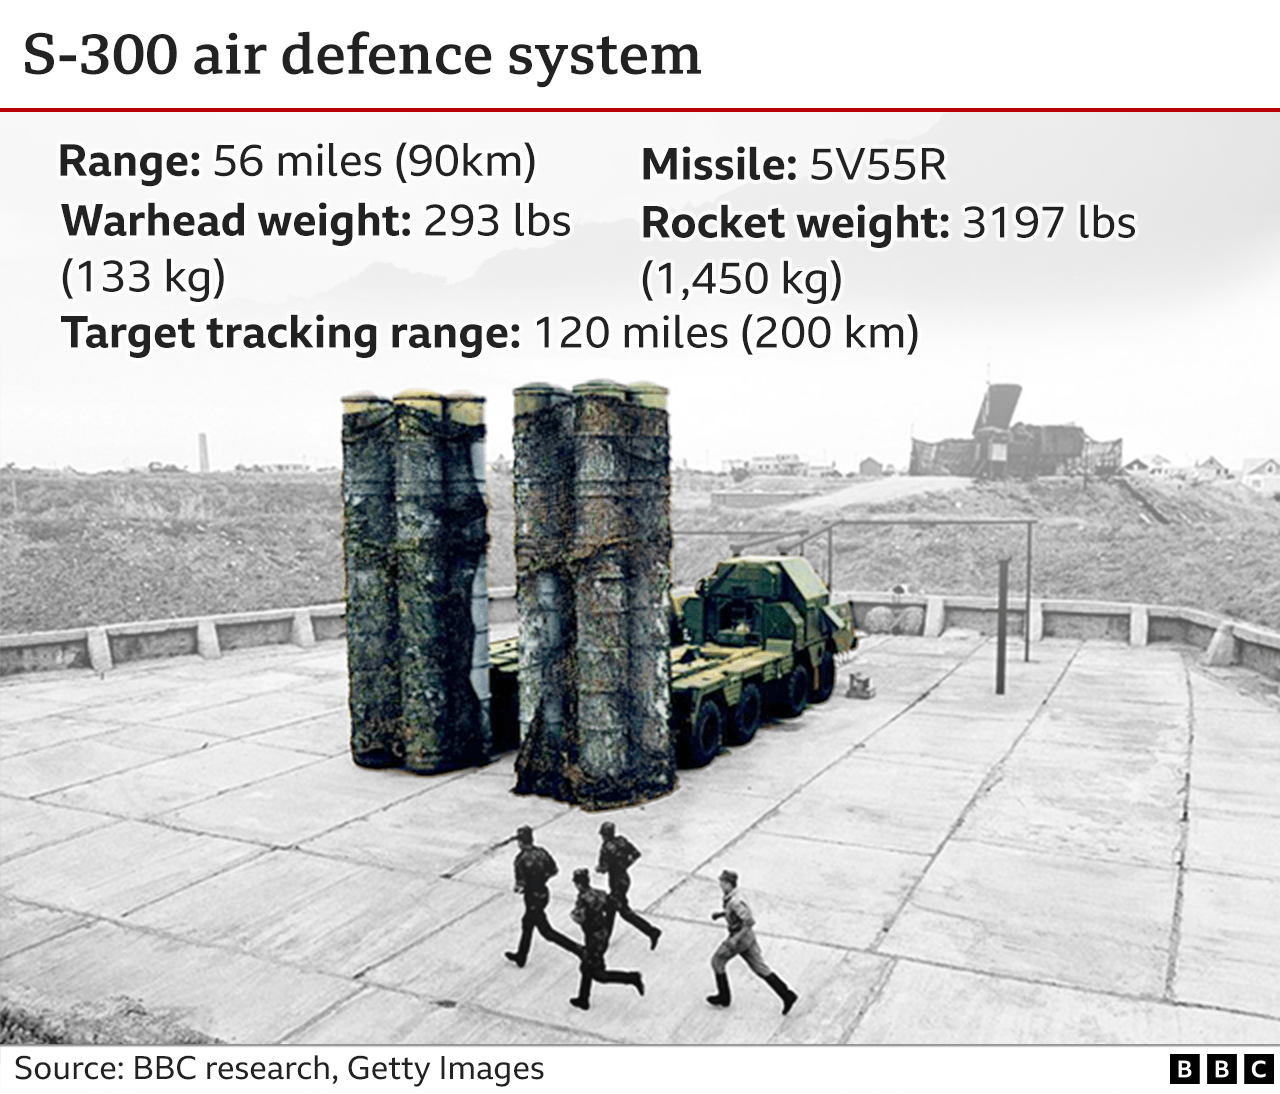 Graphic on S-300 air defences